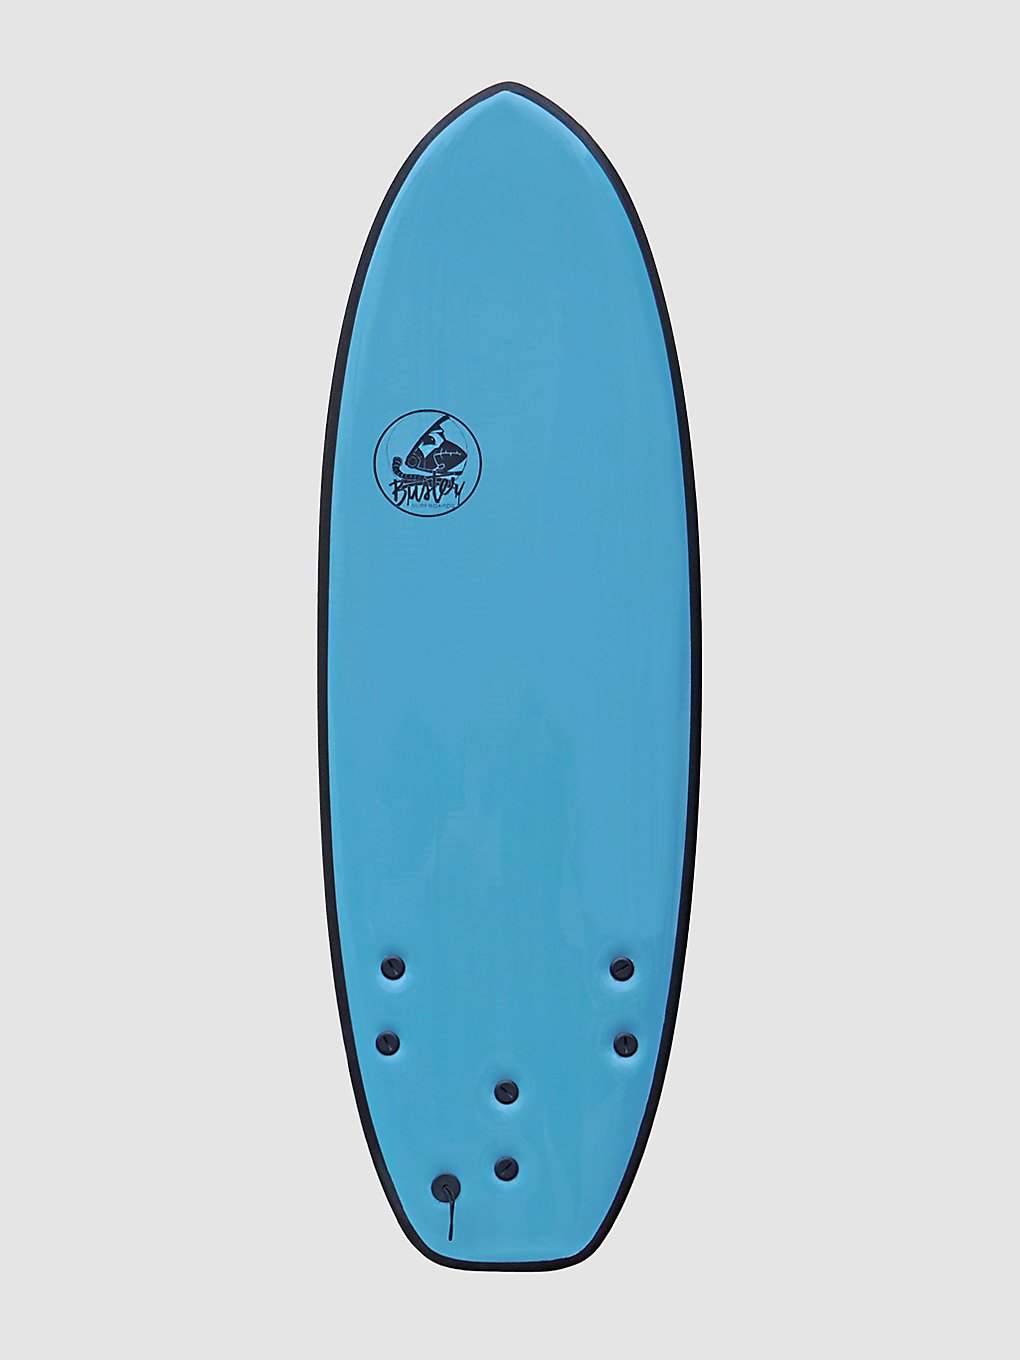 Buster Puffy Puffin Softboard 4’8 Riversurf / Rapid Surf